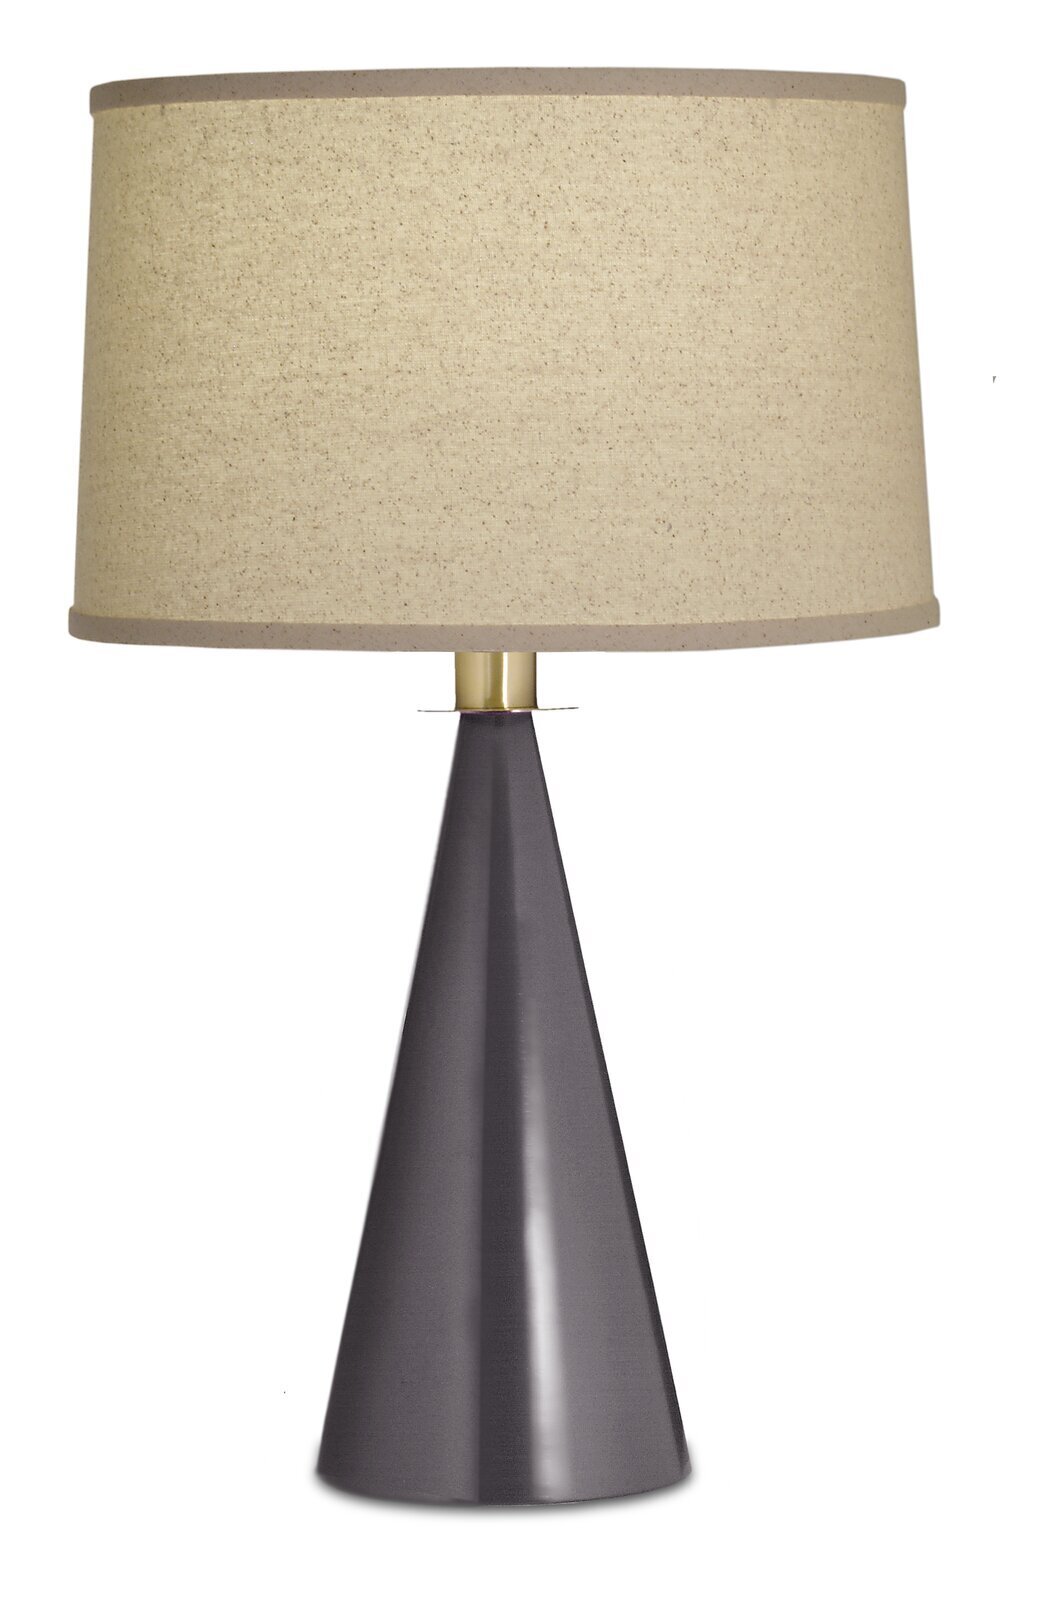 More contemporary Stiffel lamp with a drum shade